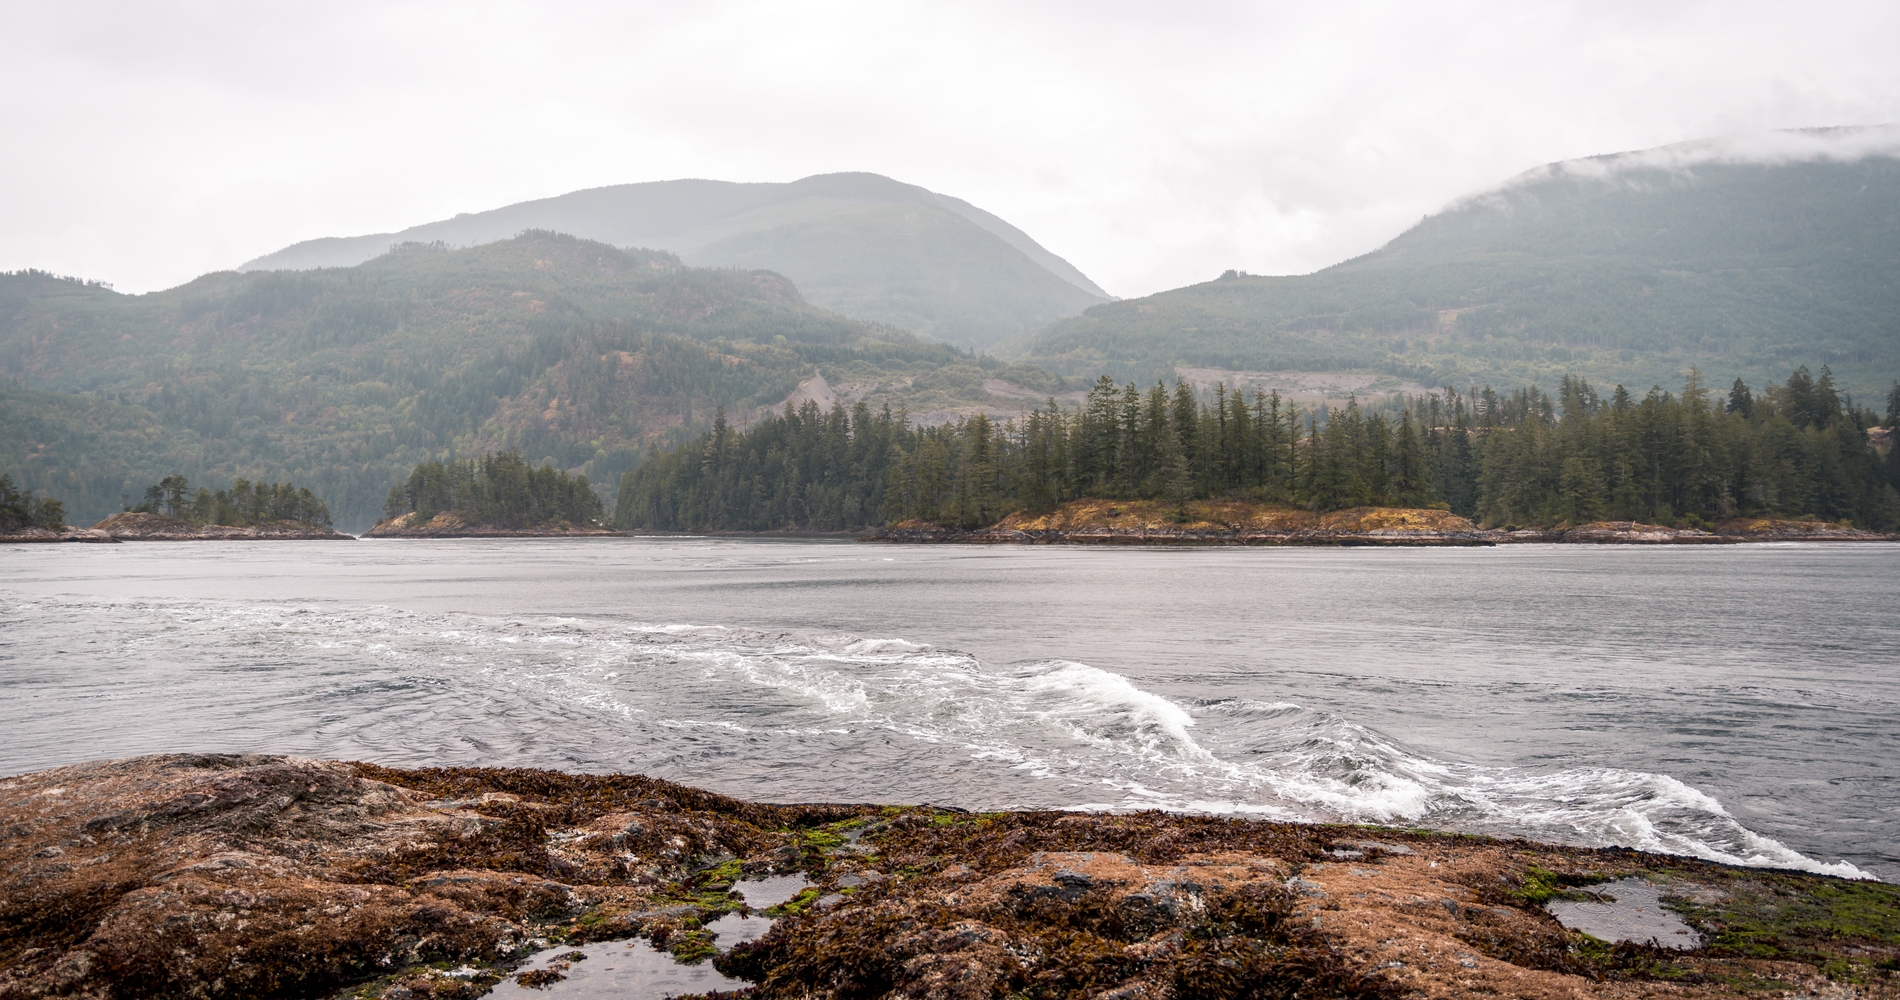 A view of the Skookumchuck Narrows on an overcast day. The rapids are in the foregrounds with grassy mountains in the distance.